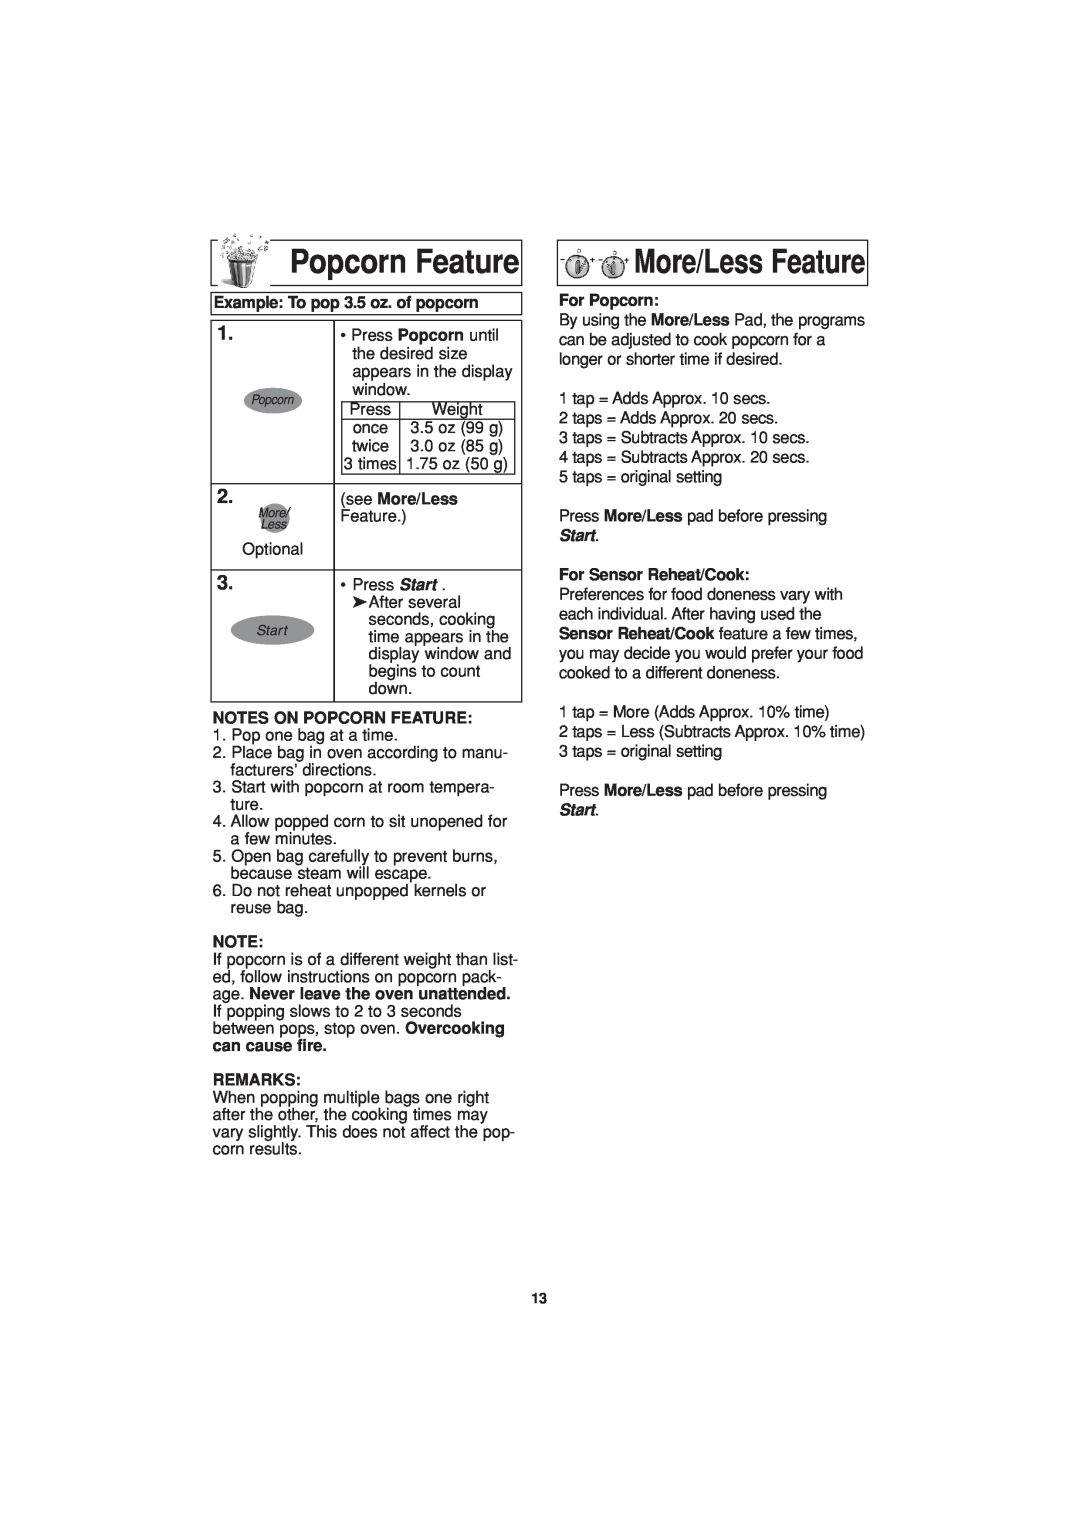 Panasonic NN-T694 Popcorn Feature, More/Less Feature, Example To pop 3.5 oz. of popcorn, see More/Less, Remarks 